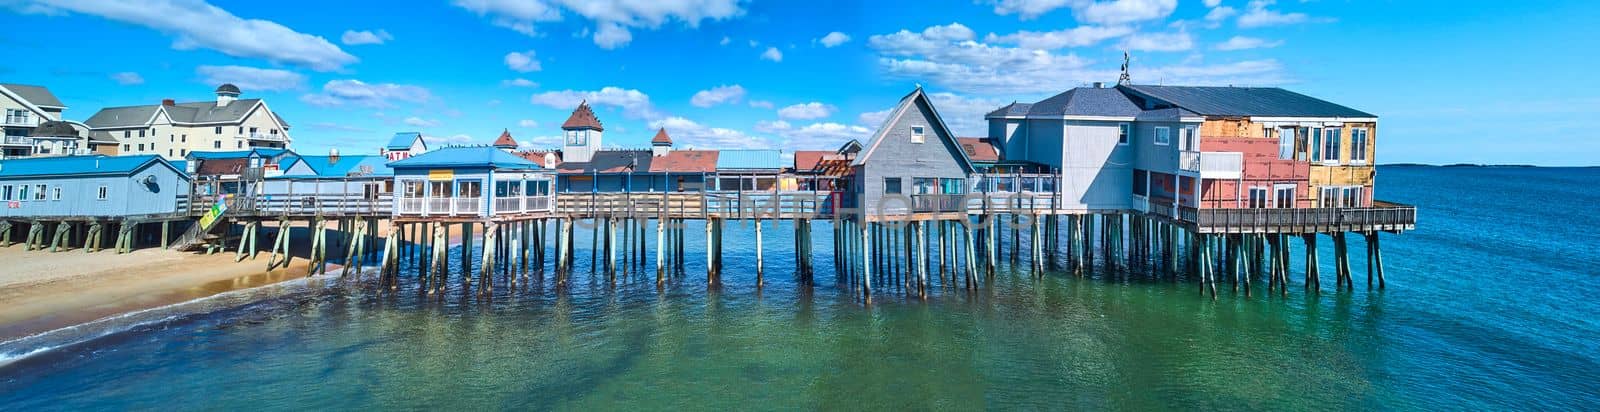 Stunning side profile of entire old wood pier in Maine covered in shops and buildings on beach by njproductions